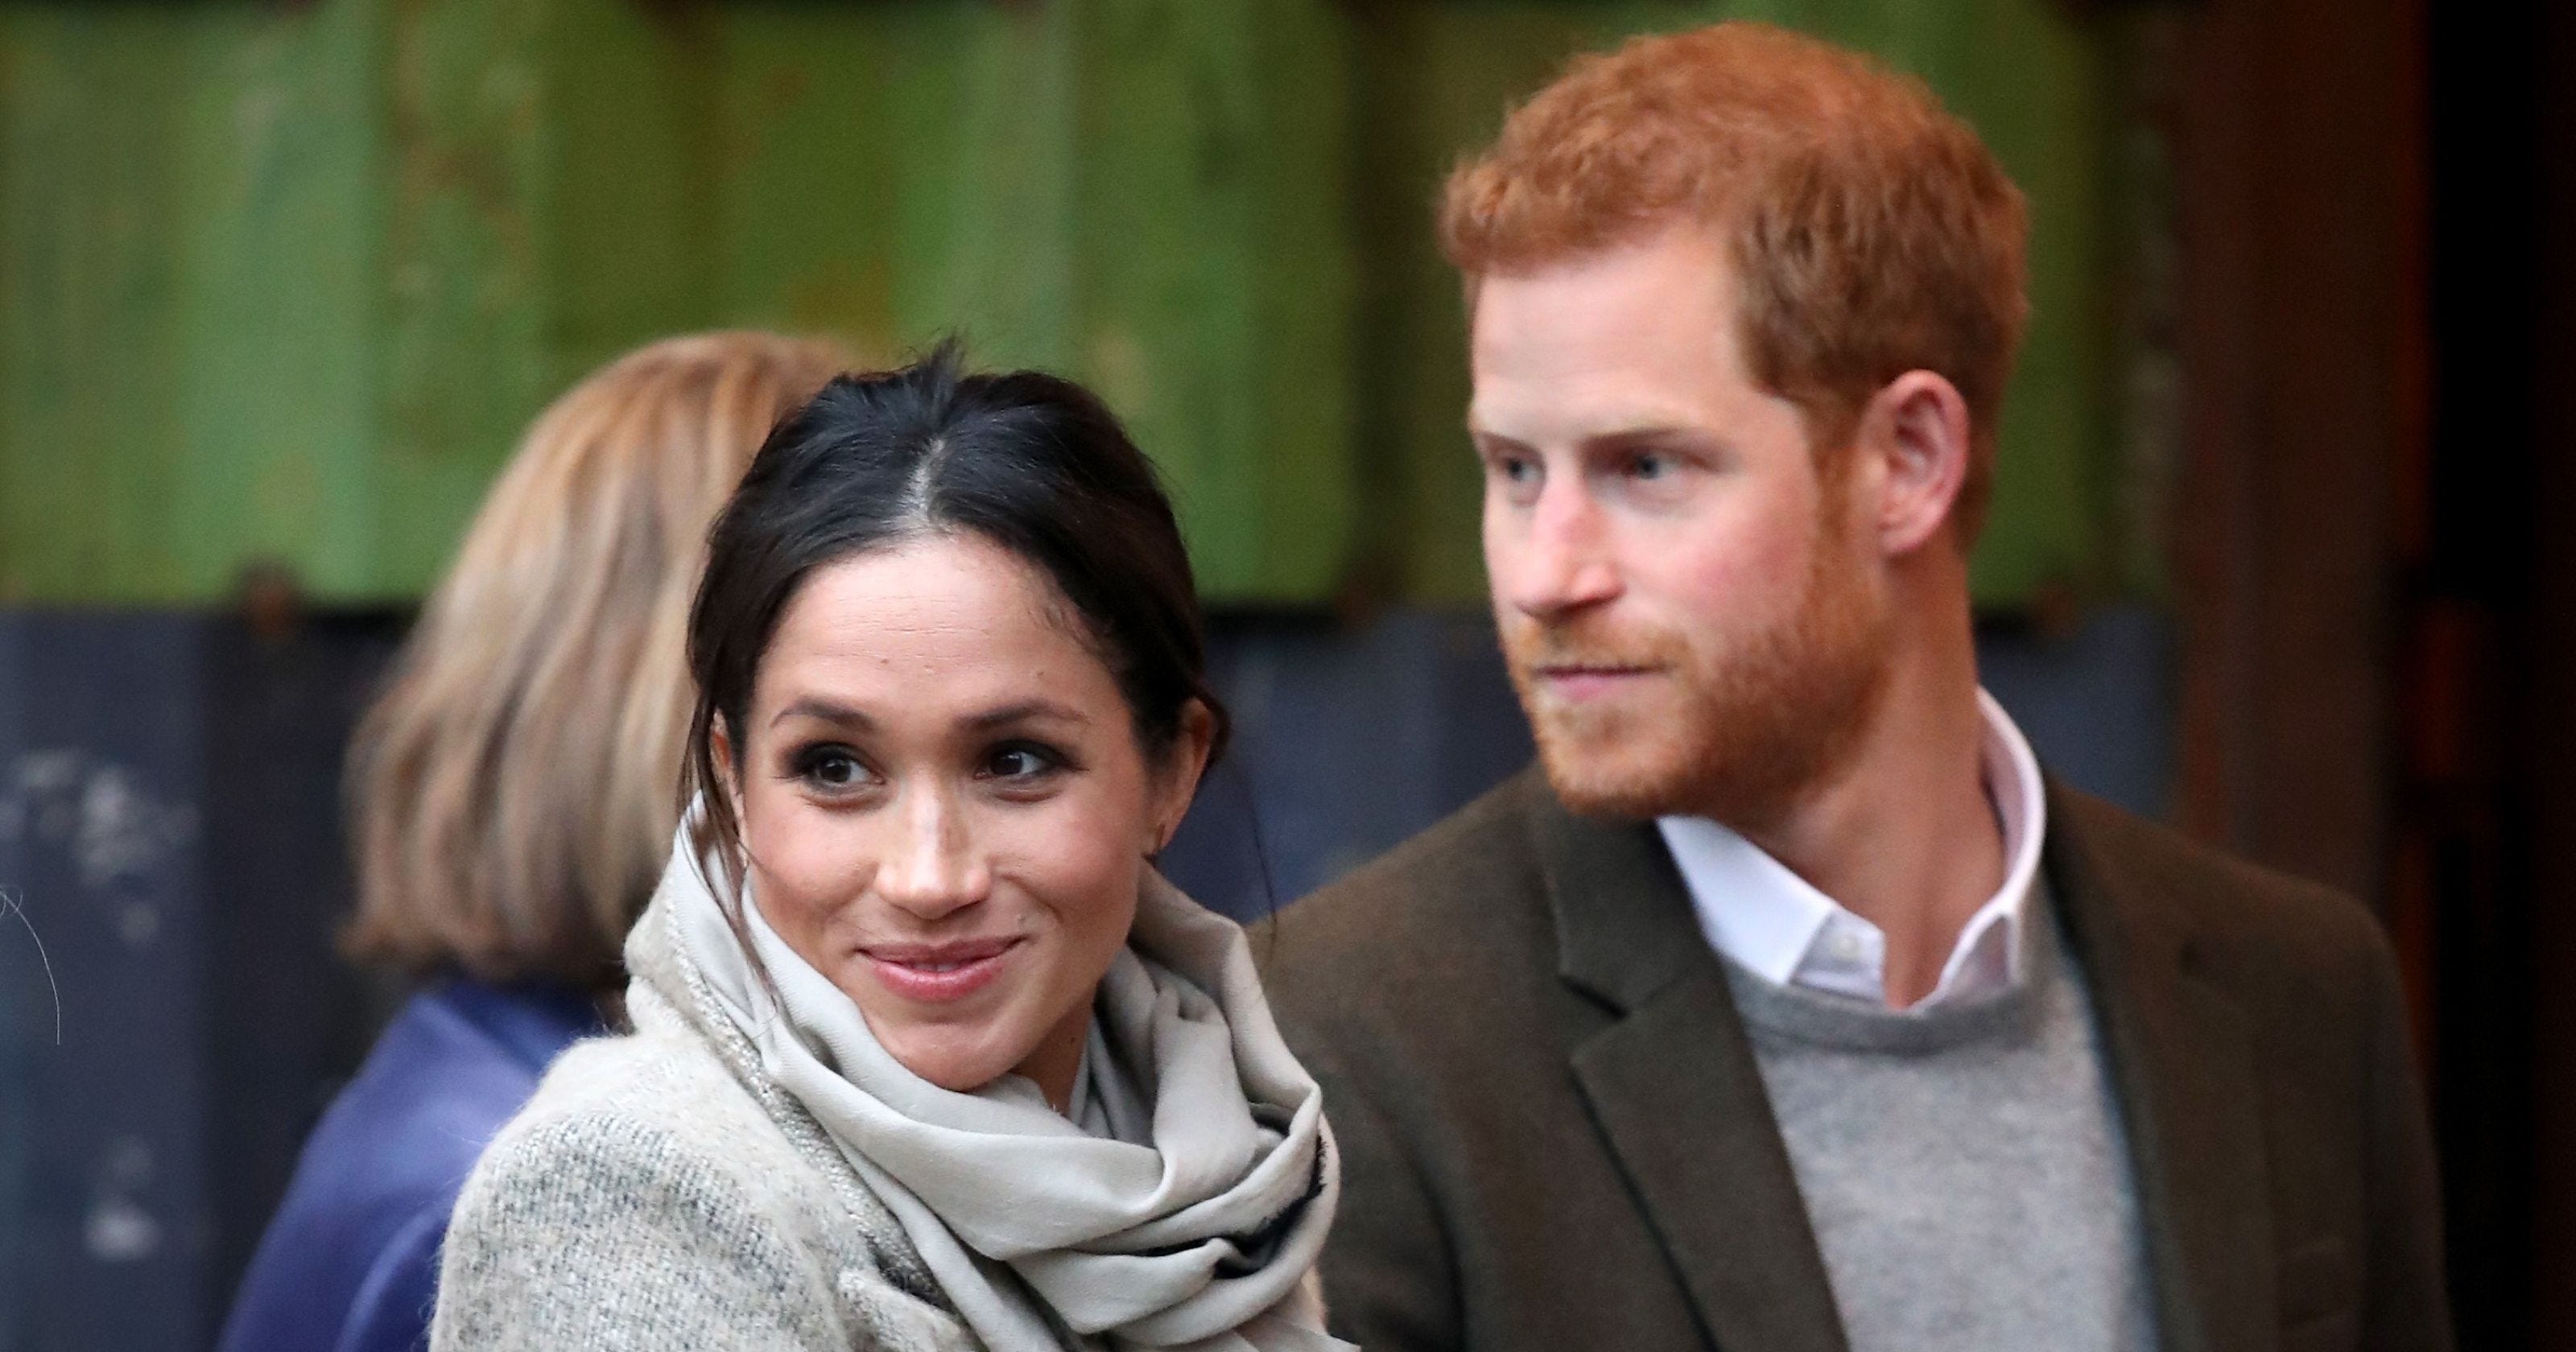 Prince Harry and Meghan Markle Secret Divorce Royal Couple has already Broken Up the Relationship